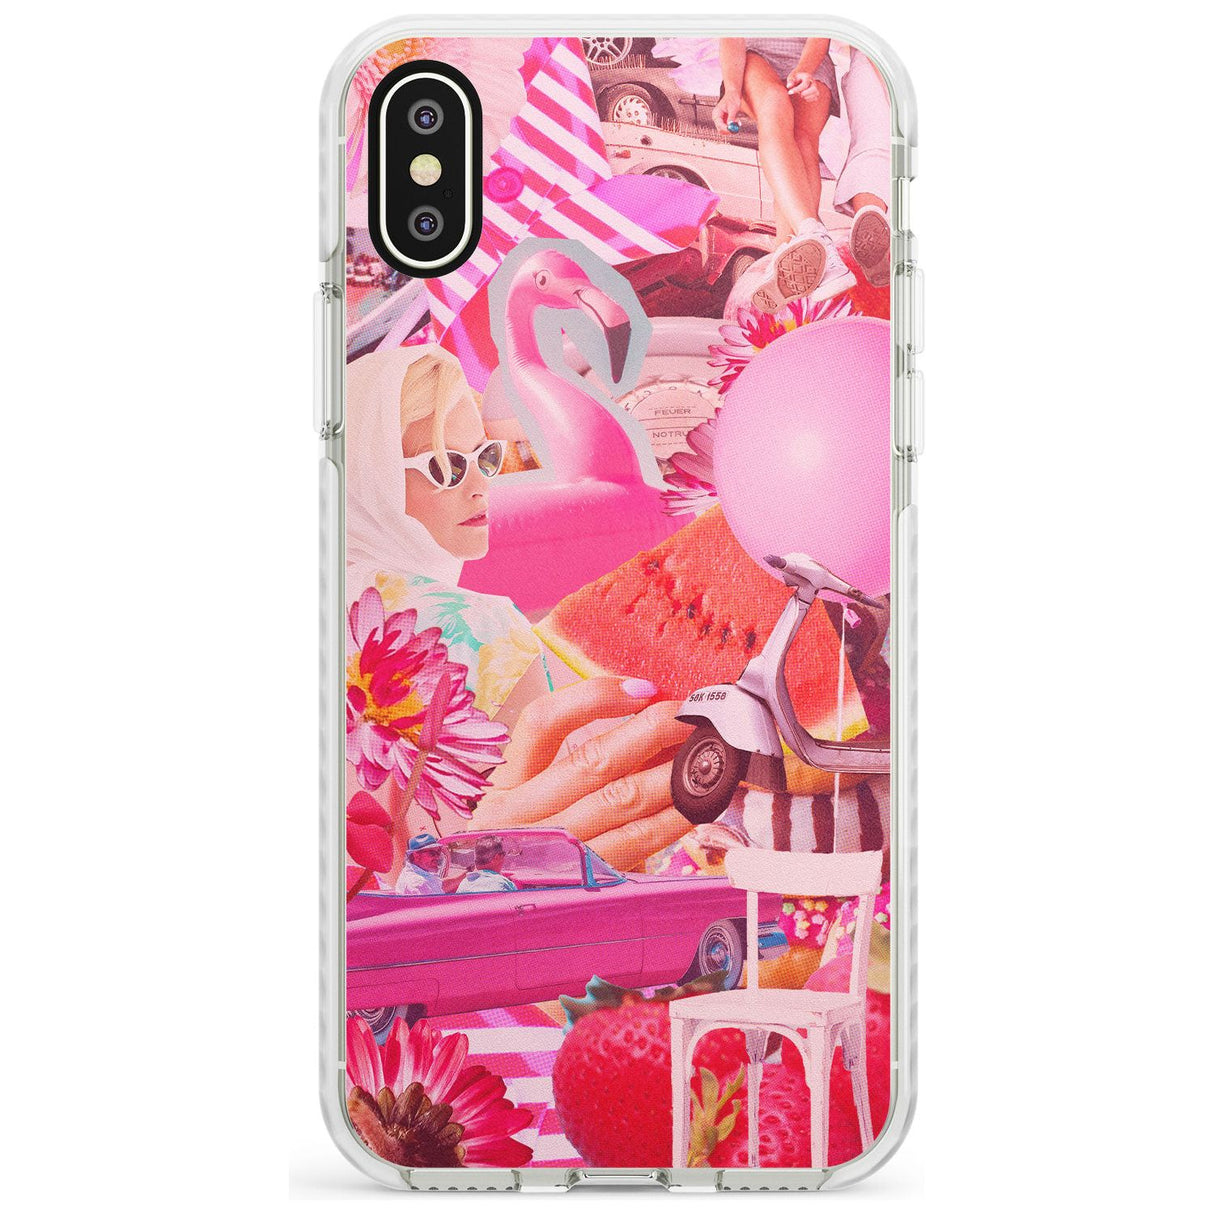 Vintage Collage: Pink Glamour Impact Phone Case for iPhone X XS Max XR